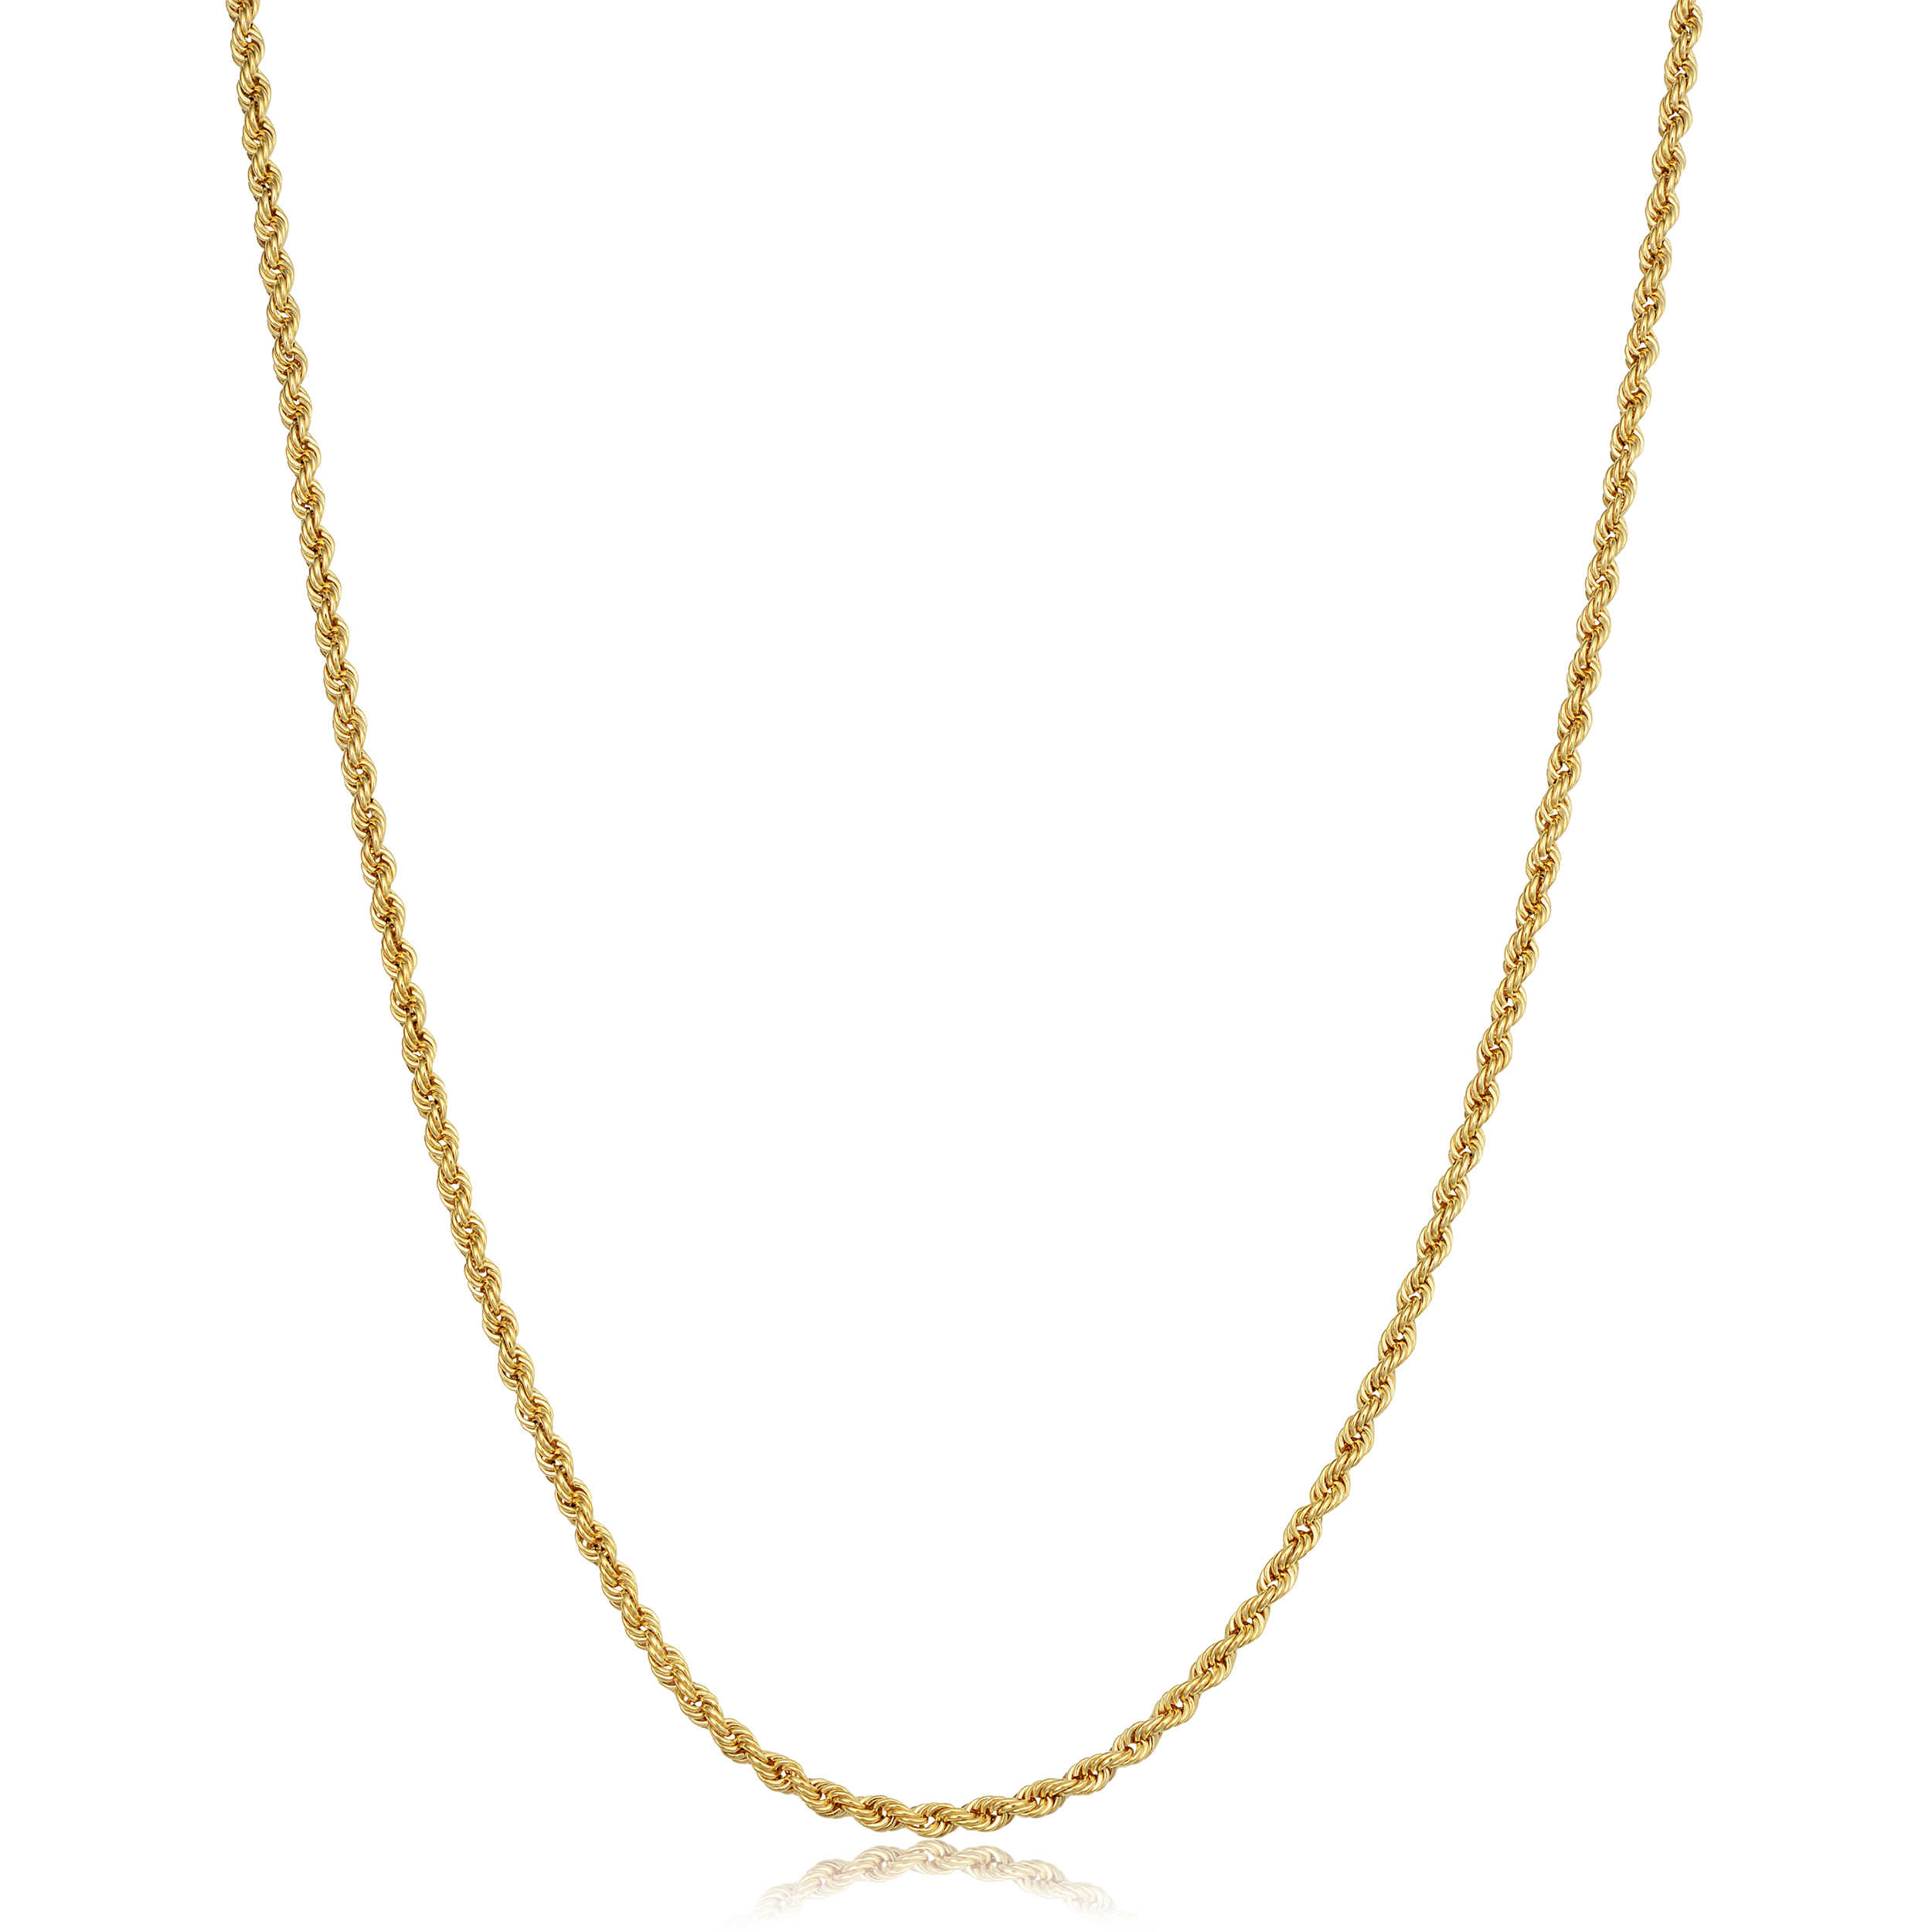 10Ky 24" 1.9Mm Hollow Rope Chain